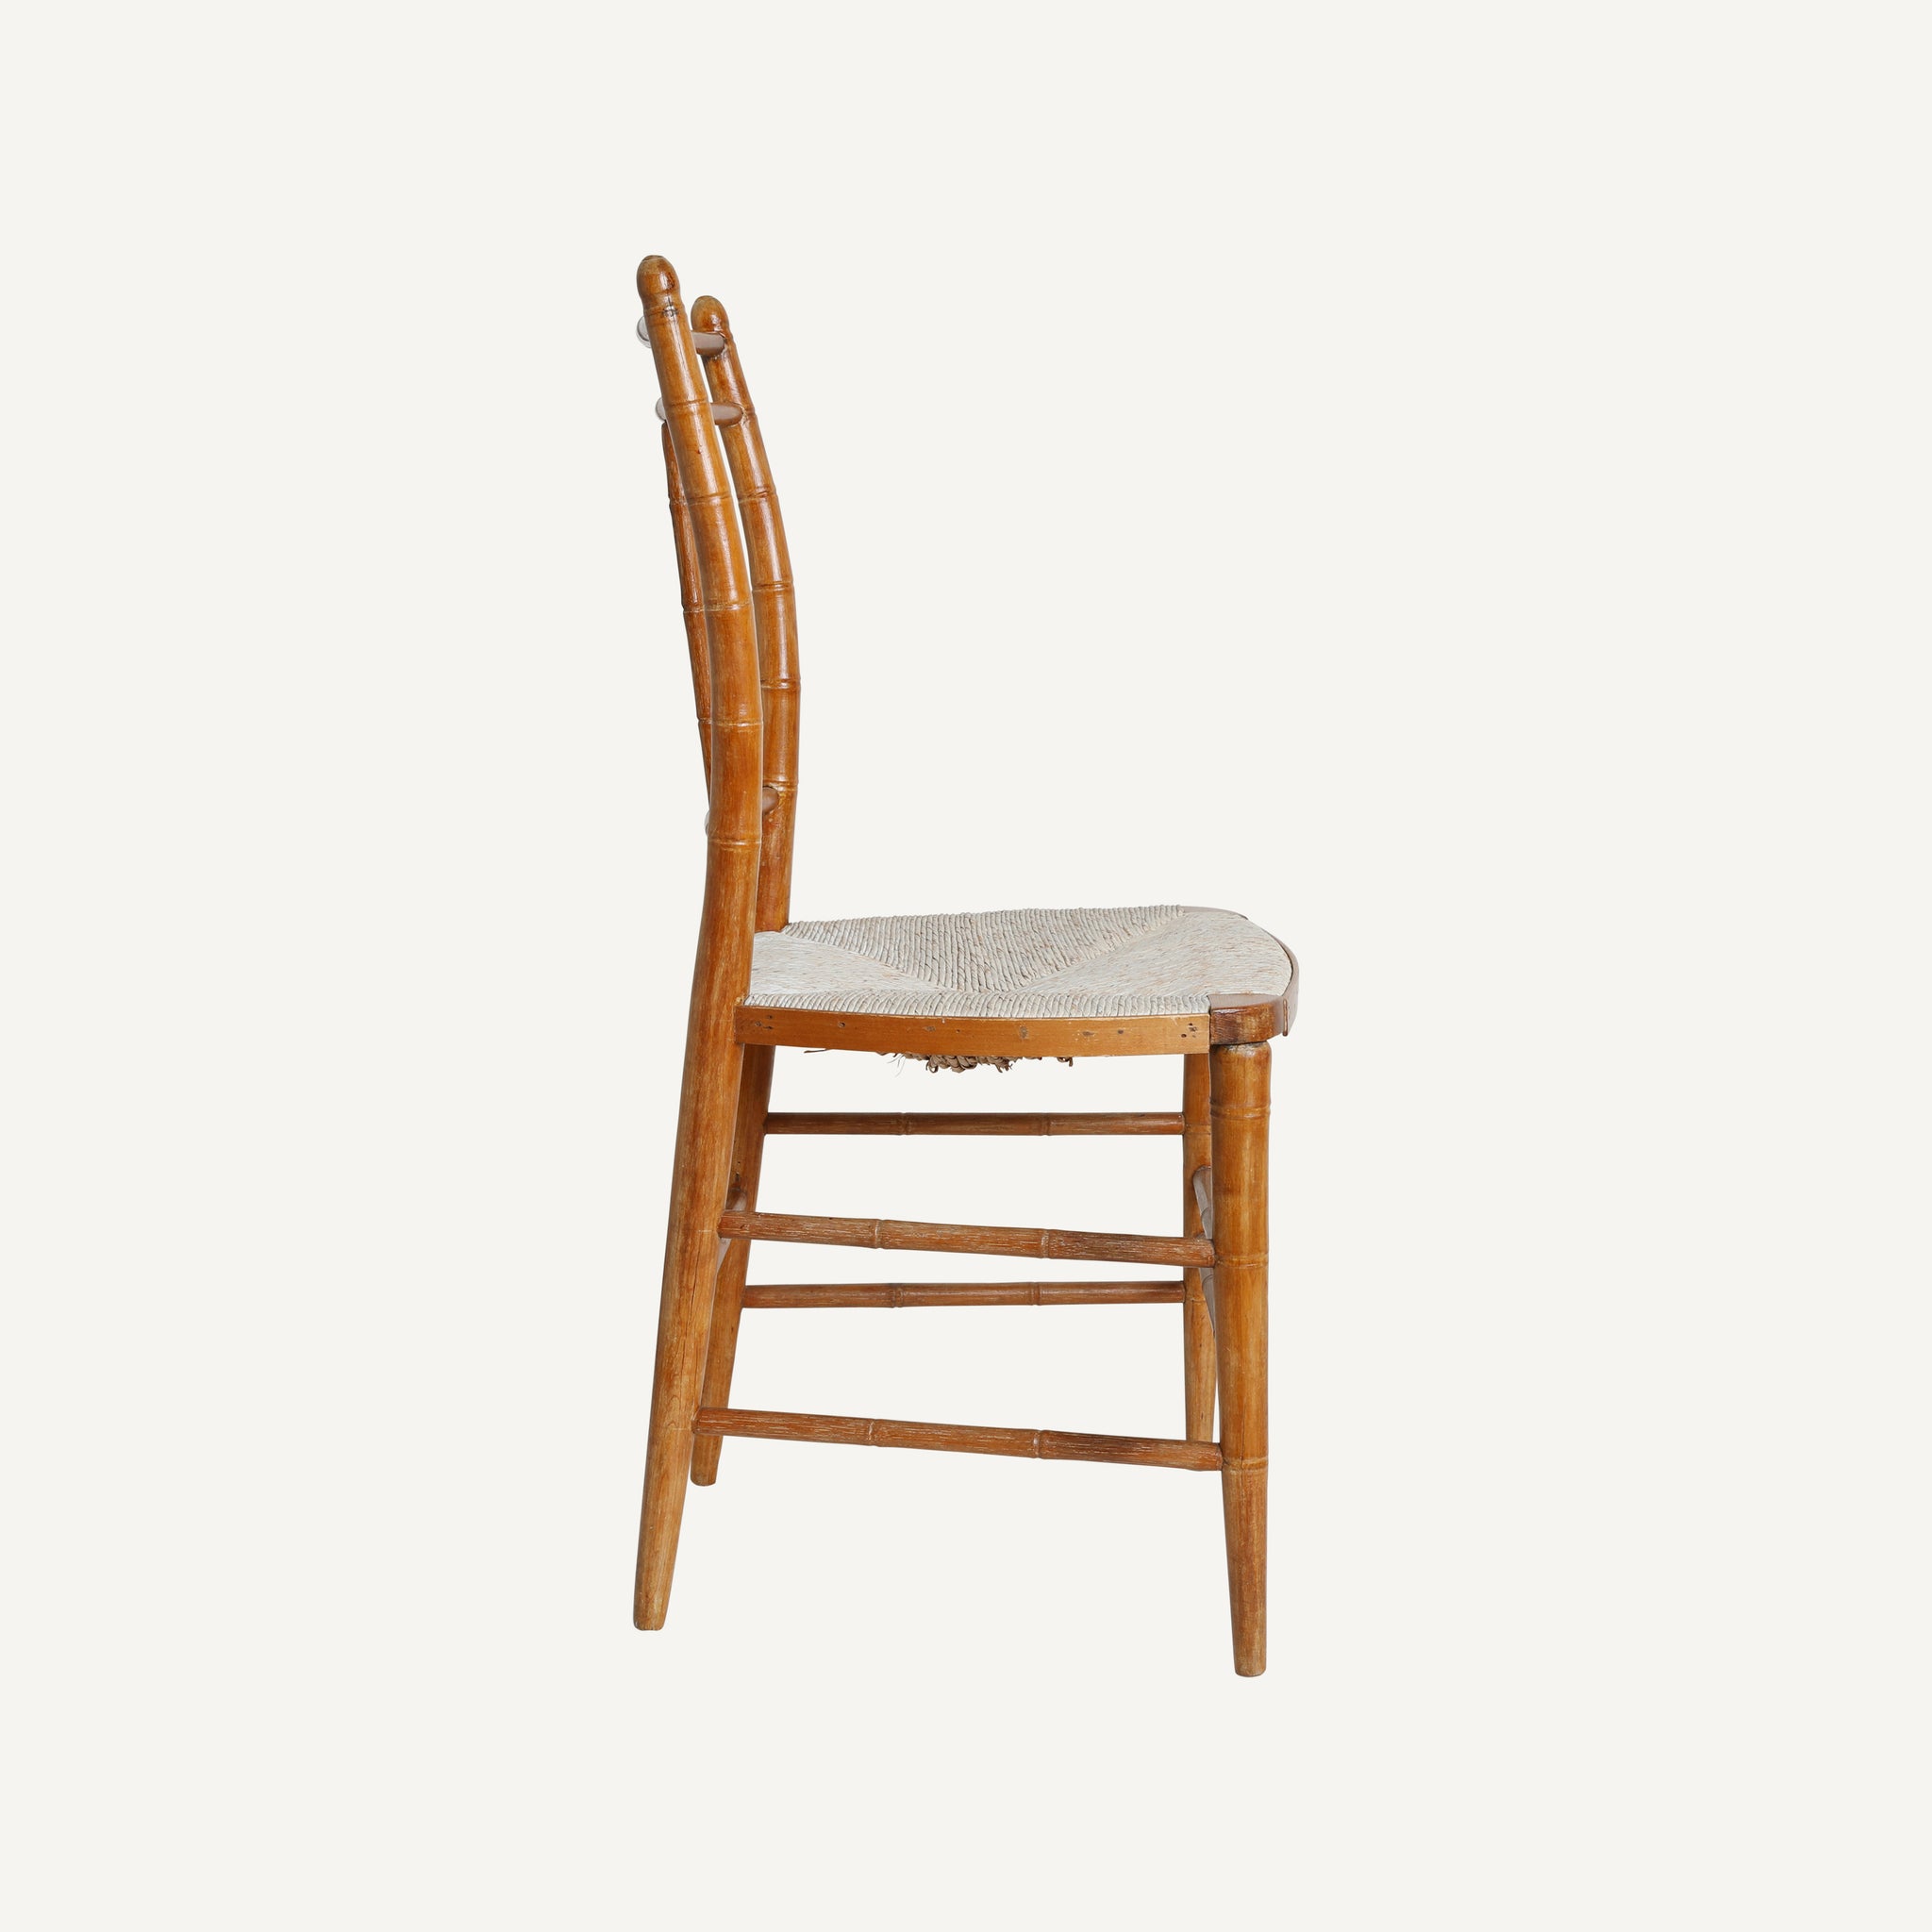 ANTIQUE FAUX BAMBOO DINING CHAIRS